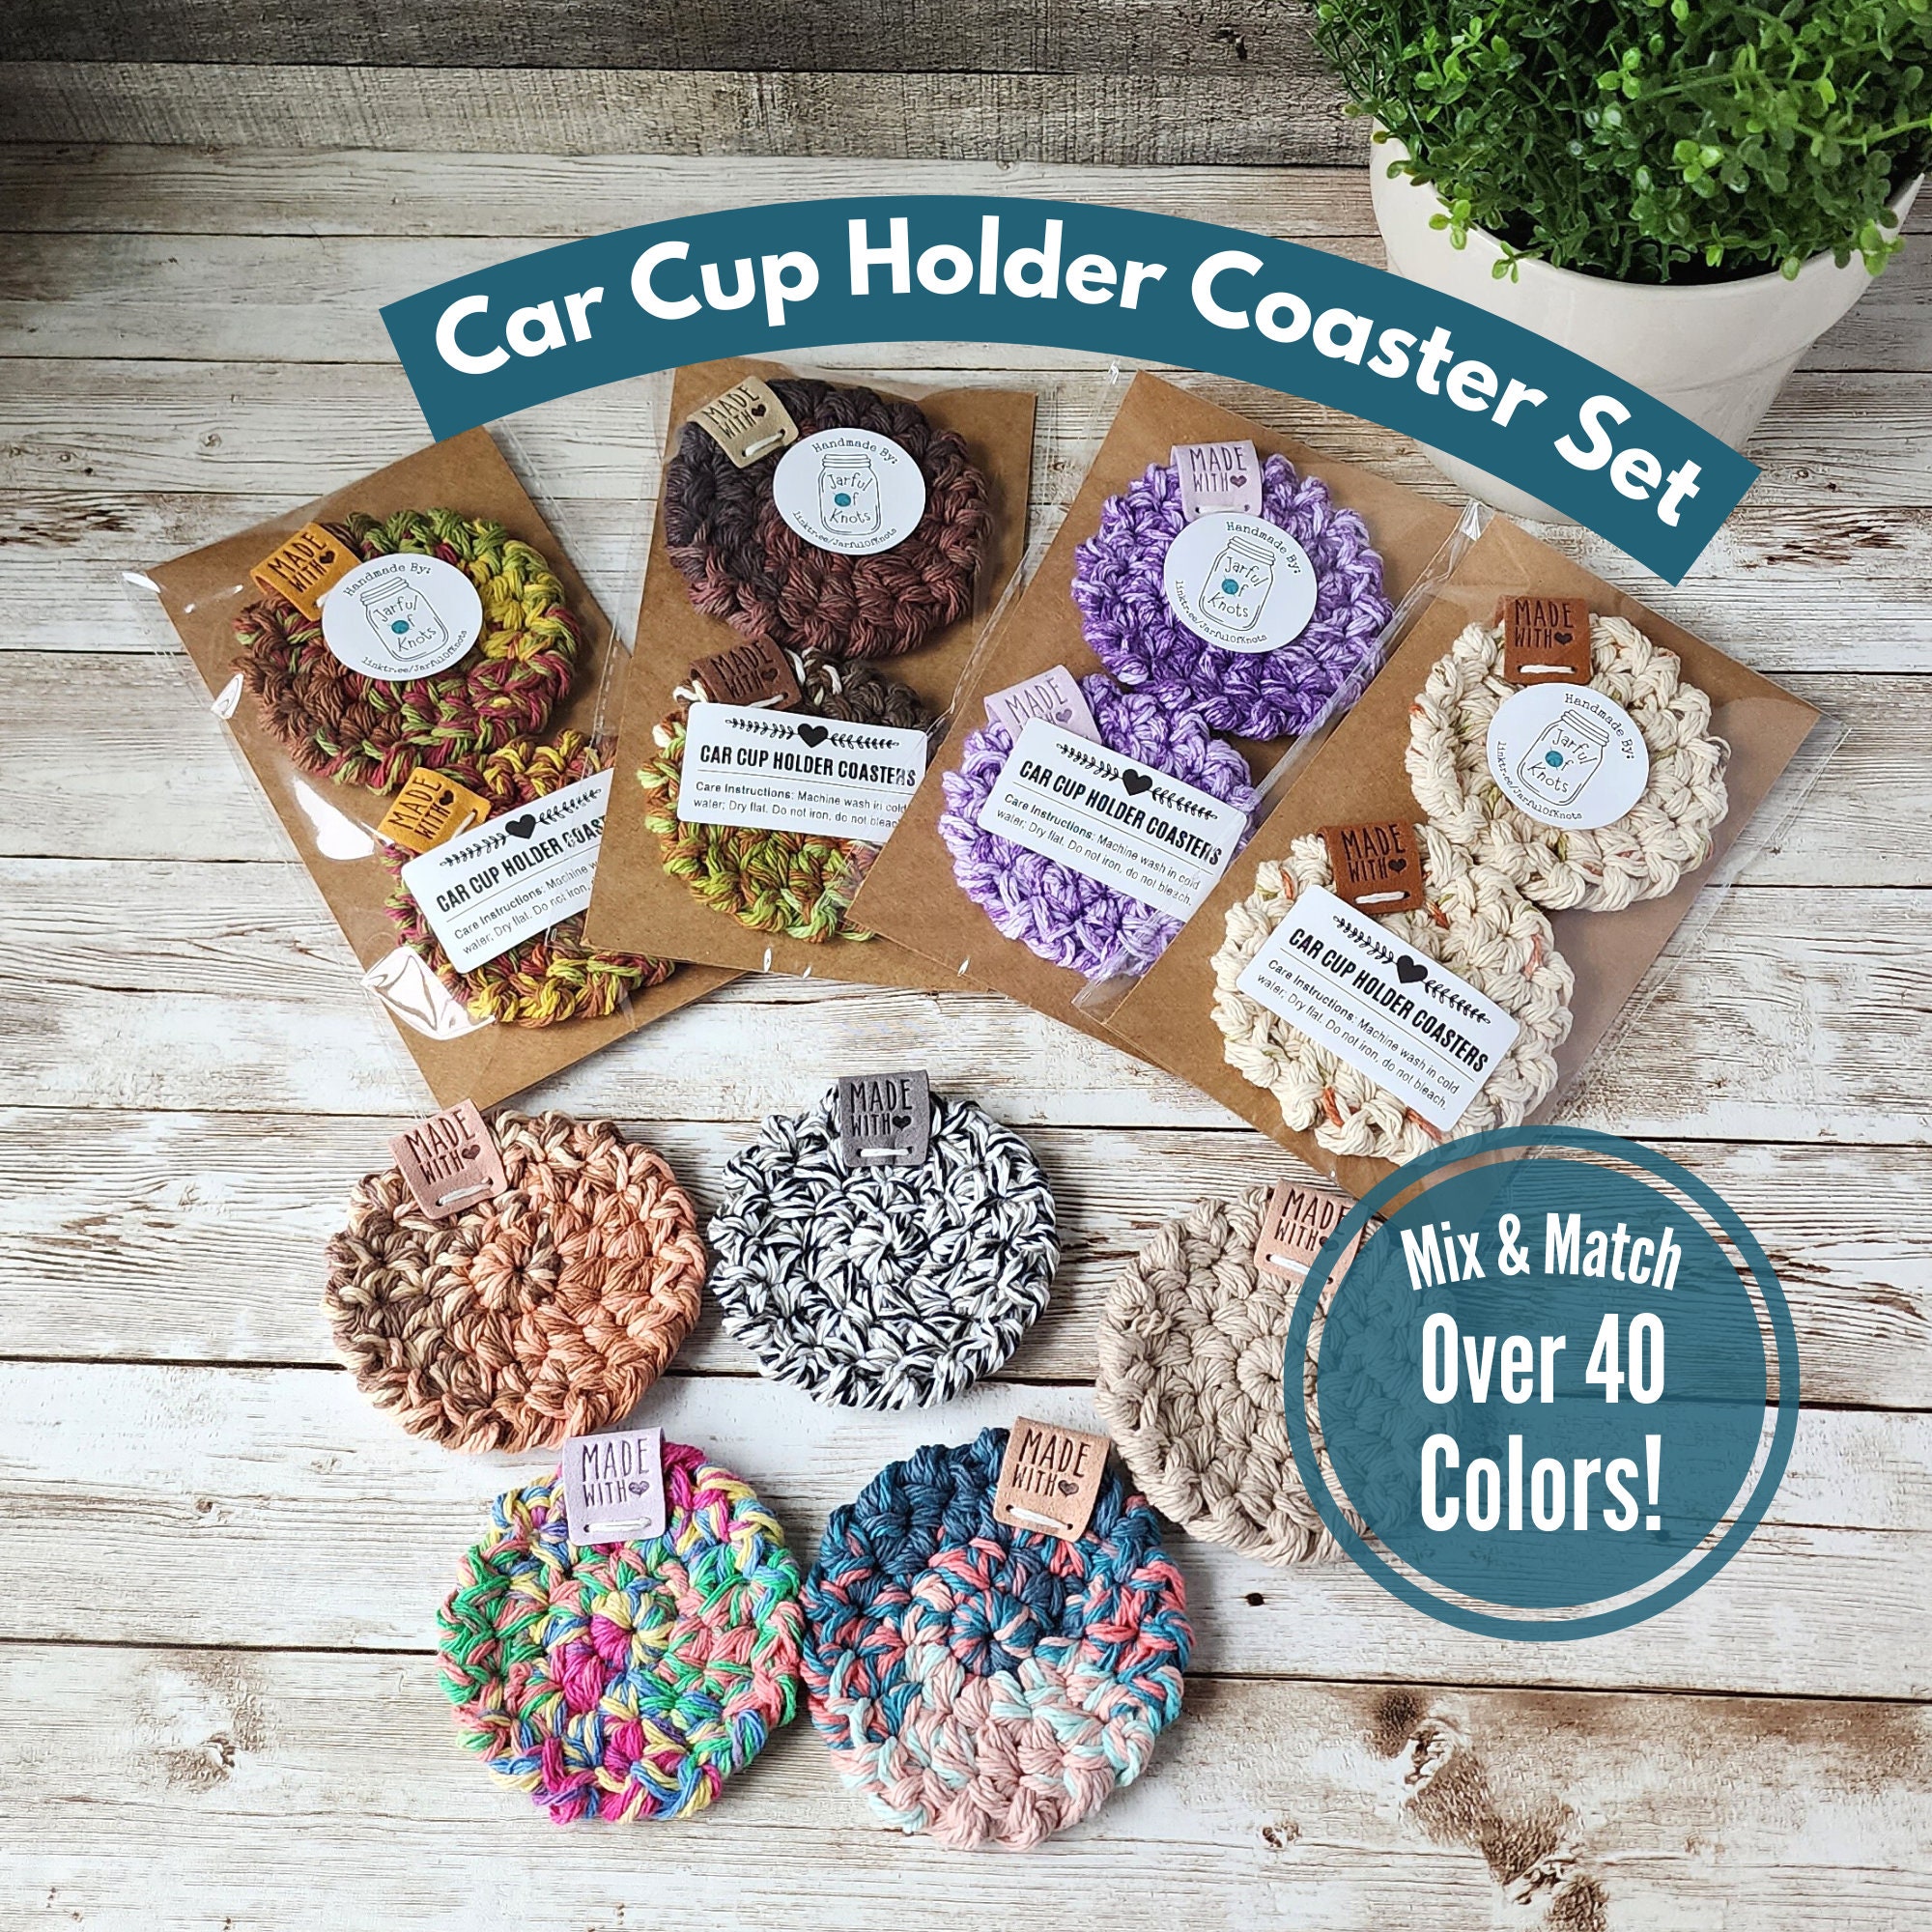 2 Pack Machine Washable Car Cup Holder Coasters, Mix Match Color, Over 40  Colors, New Car Gifts, Graduation Gift, Stocking Stuffer 